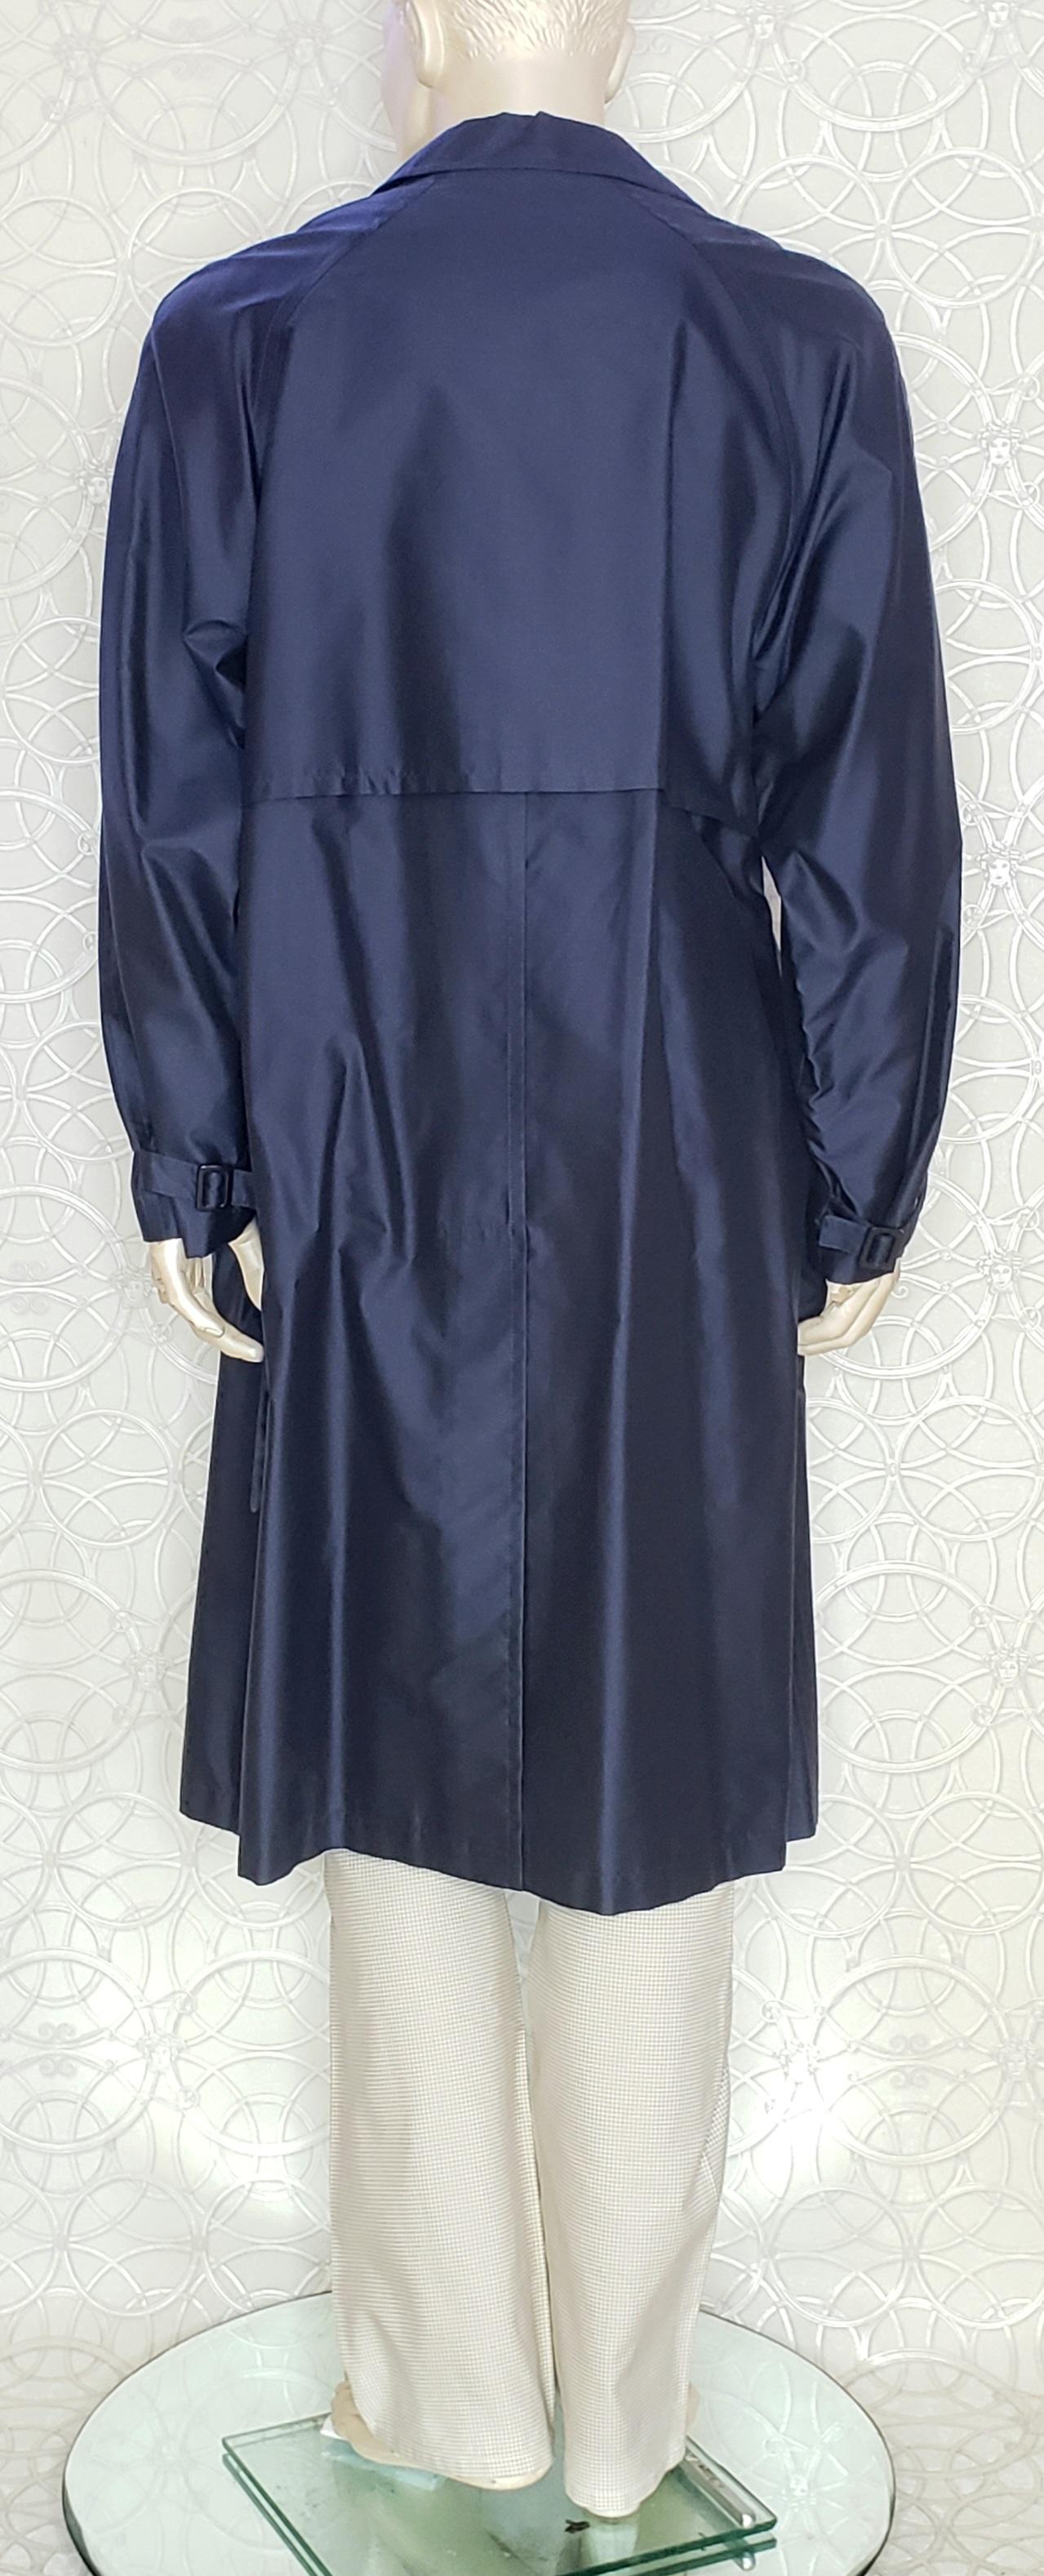 S/S 2016 Look # 34 VERSACE BELTED NAVY BLUE TRENCH SILK COAT 50 - 40 For Sale 1